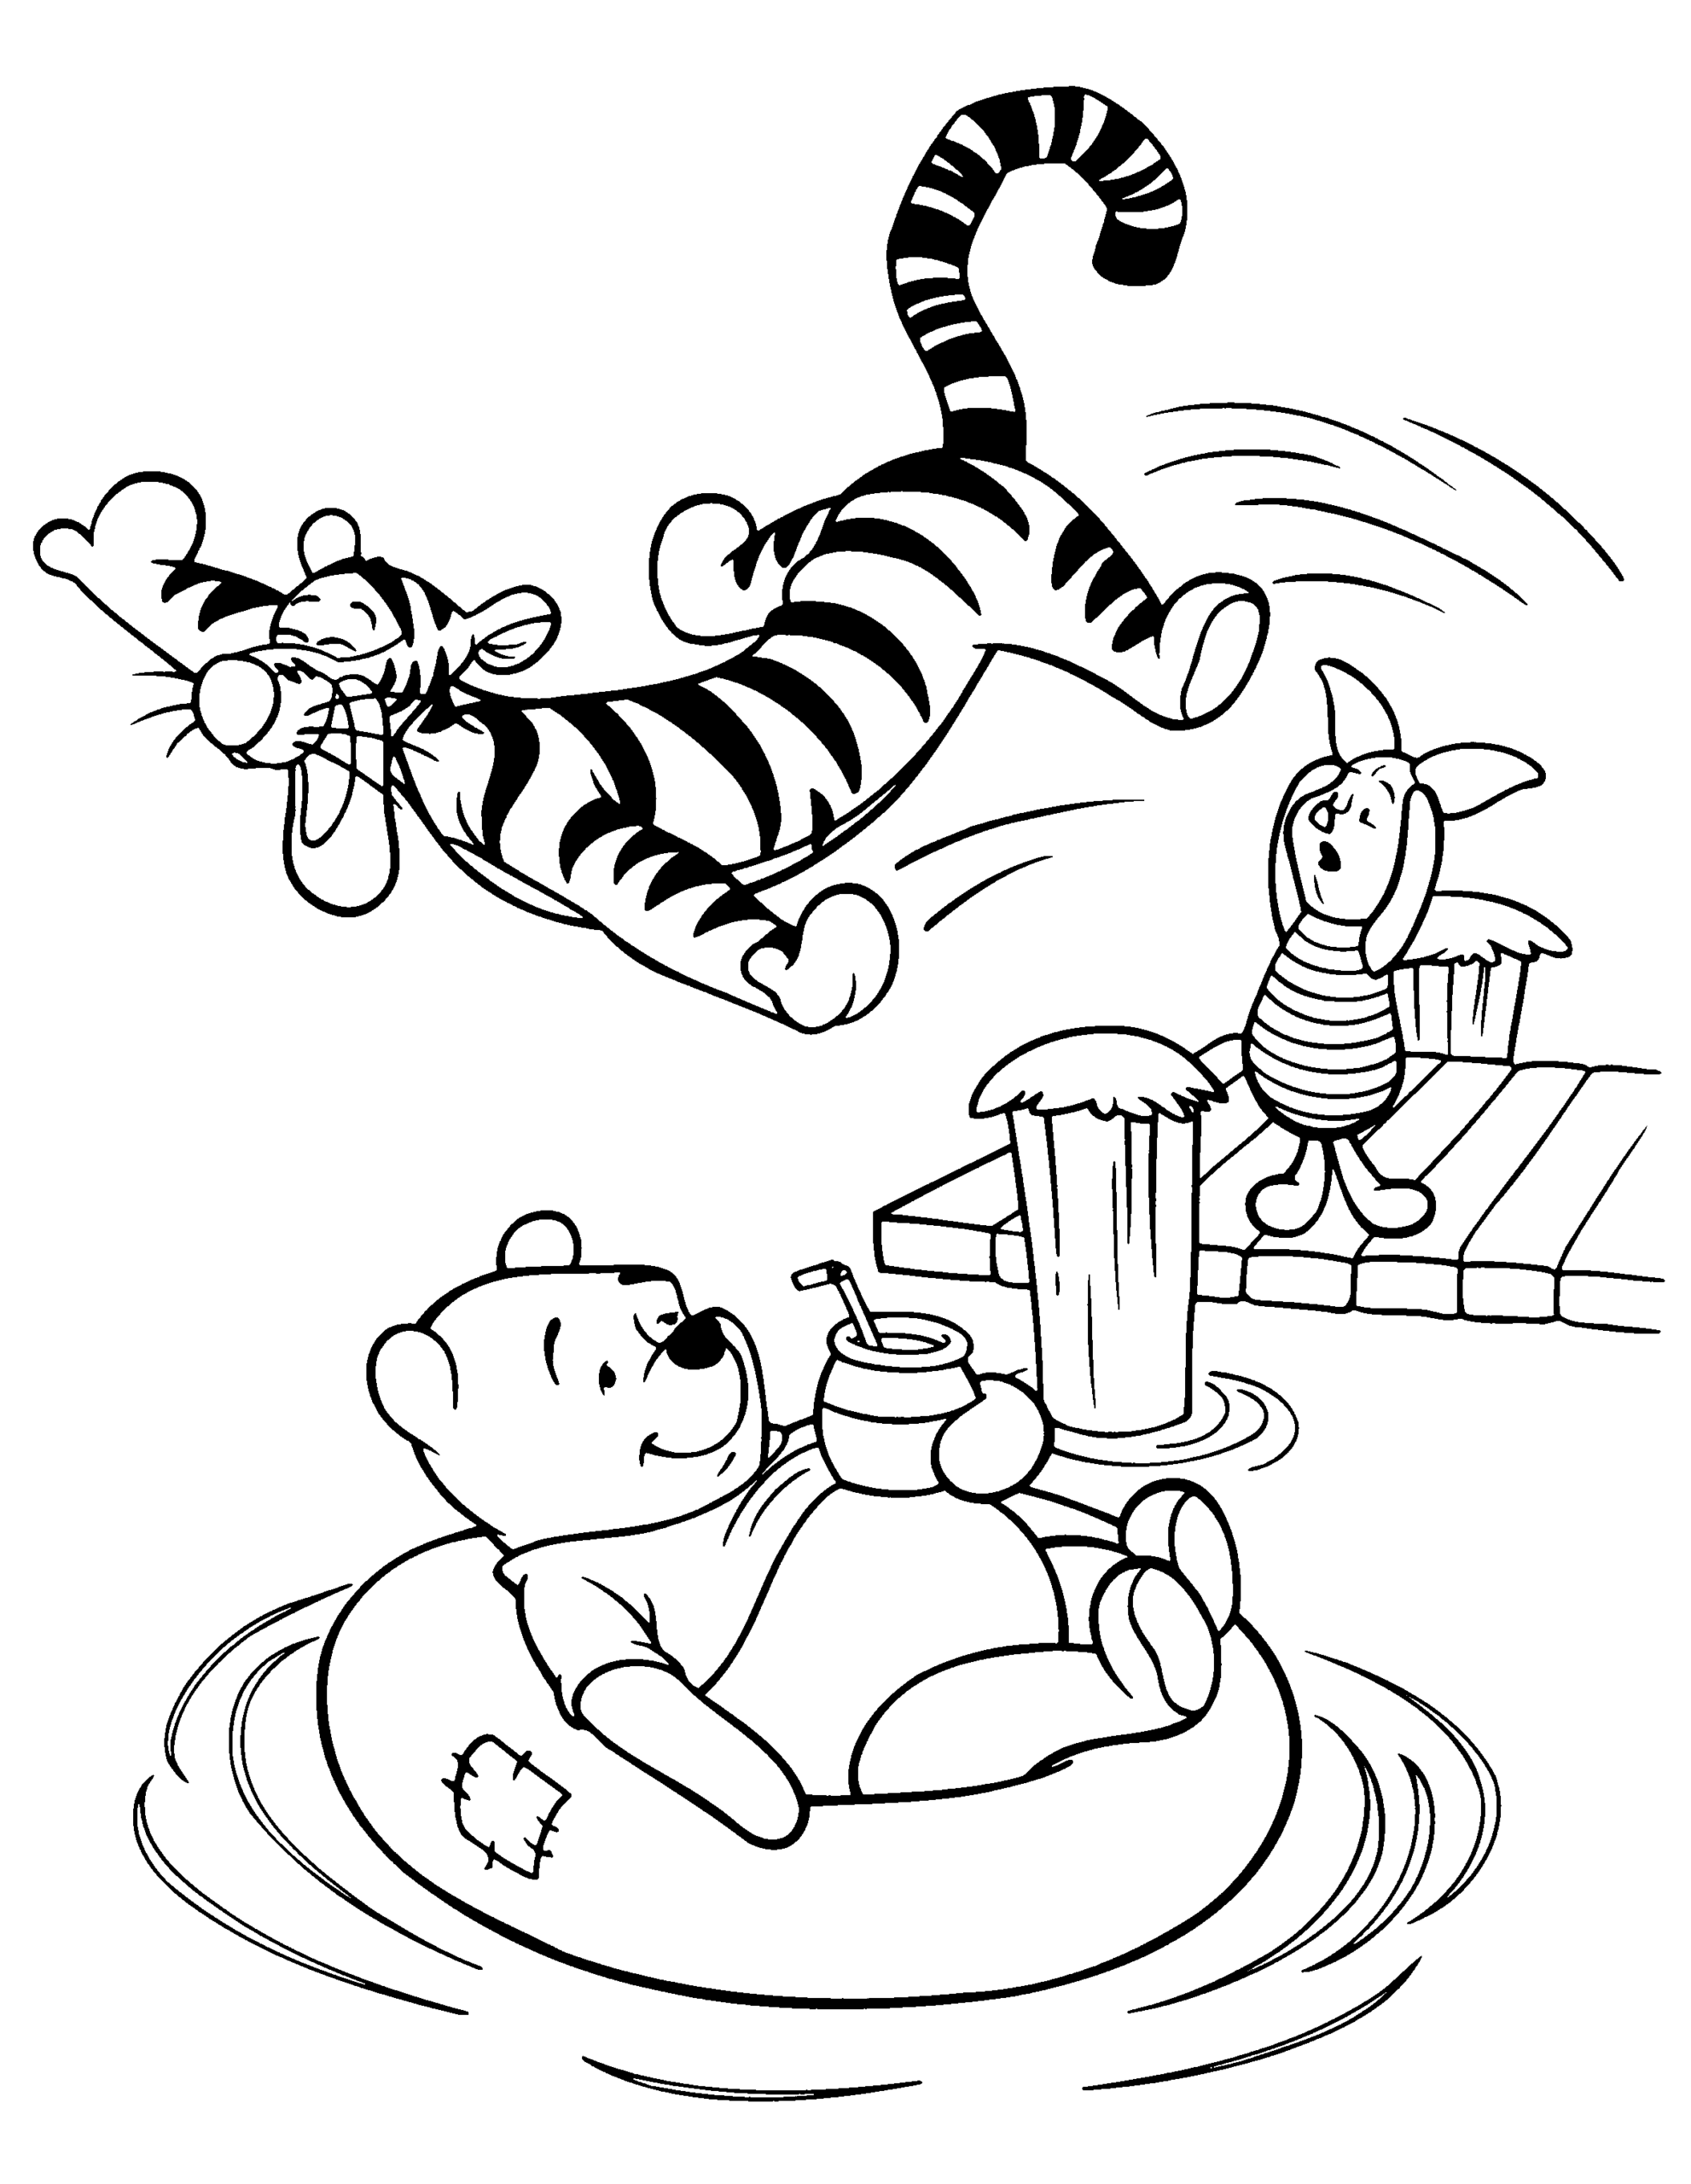 Winnie the Pooh Coloring Pages Cartoons winnie the pooh 86 Printable 2020 7207 Coloring4free